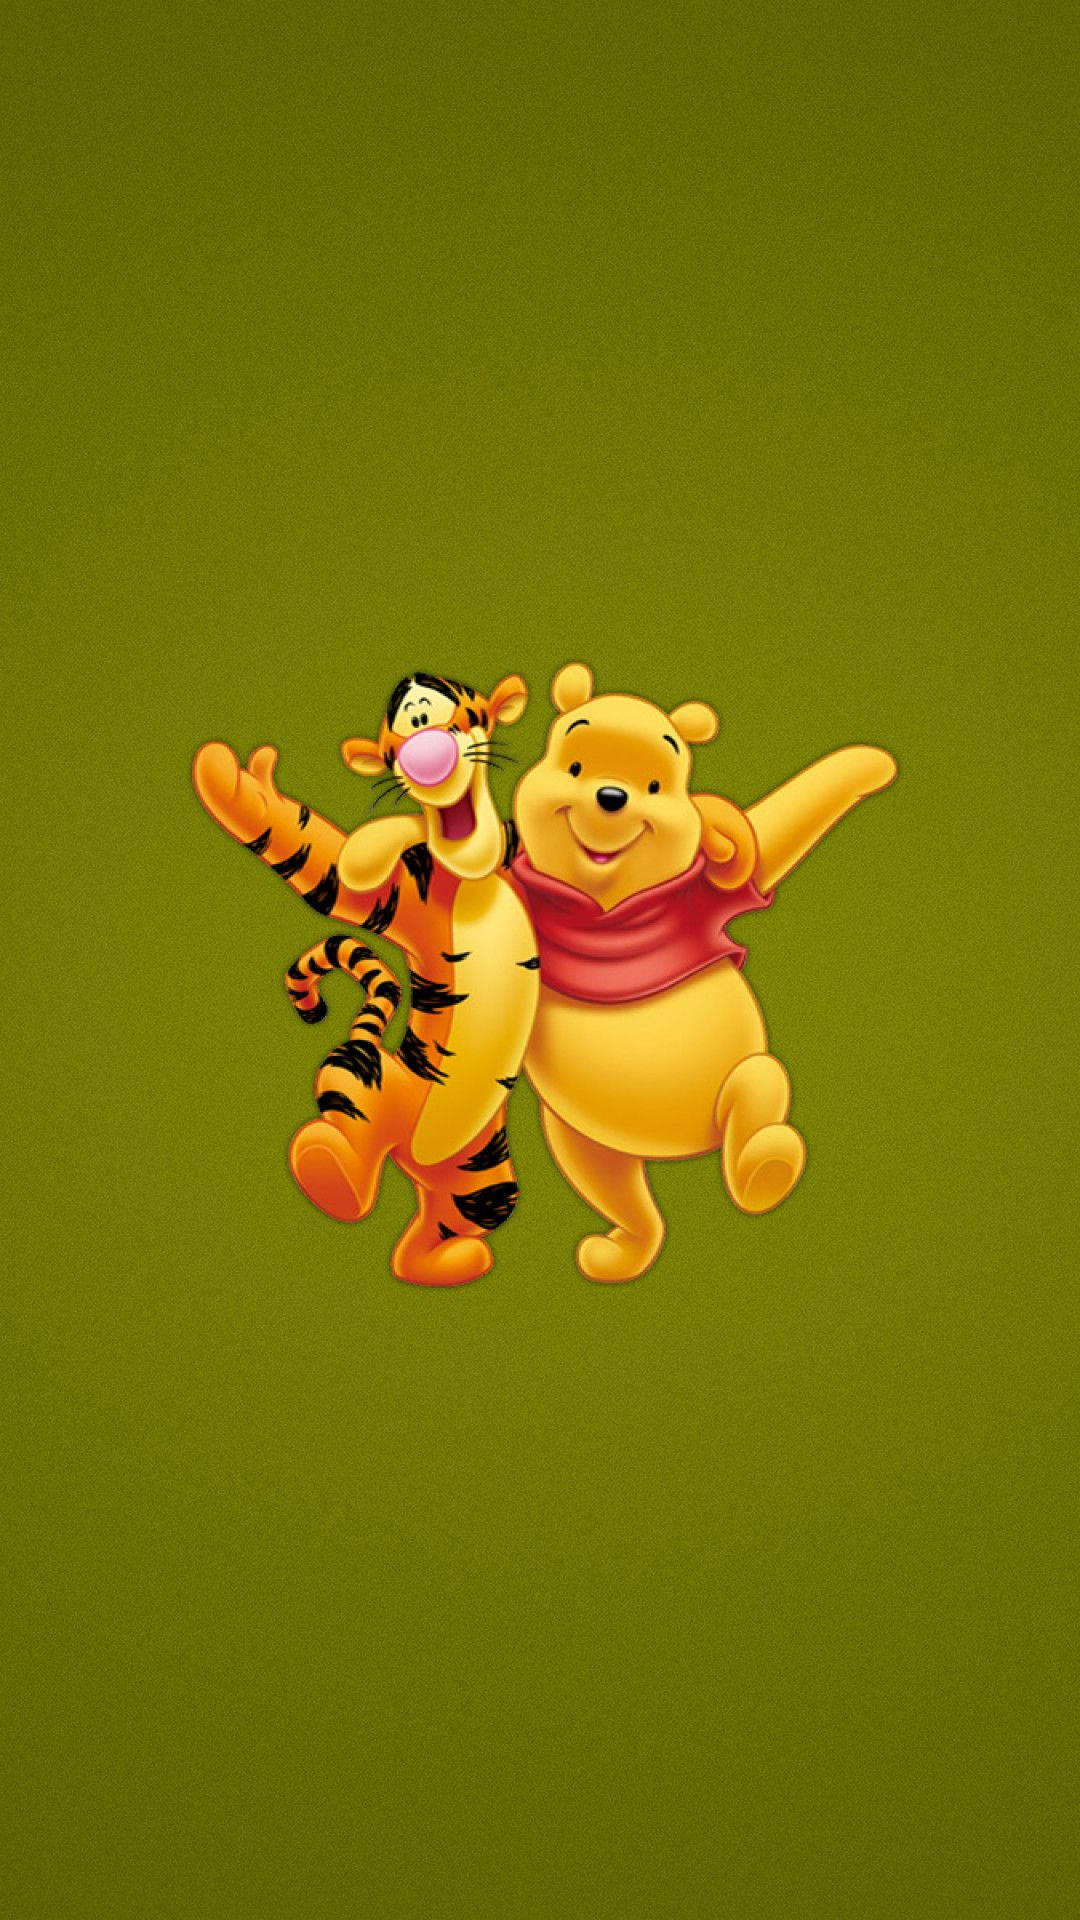 Disney Winnie The Pooh And Tigger Background